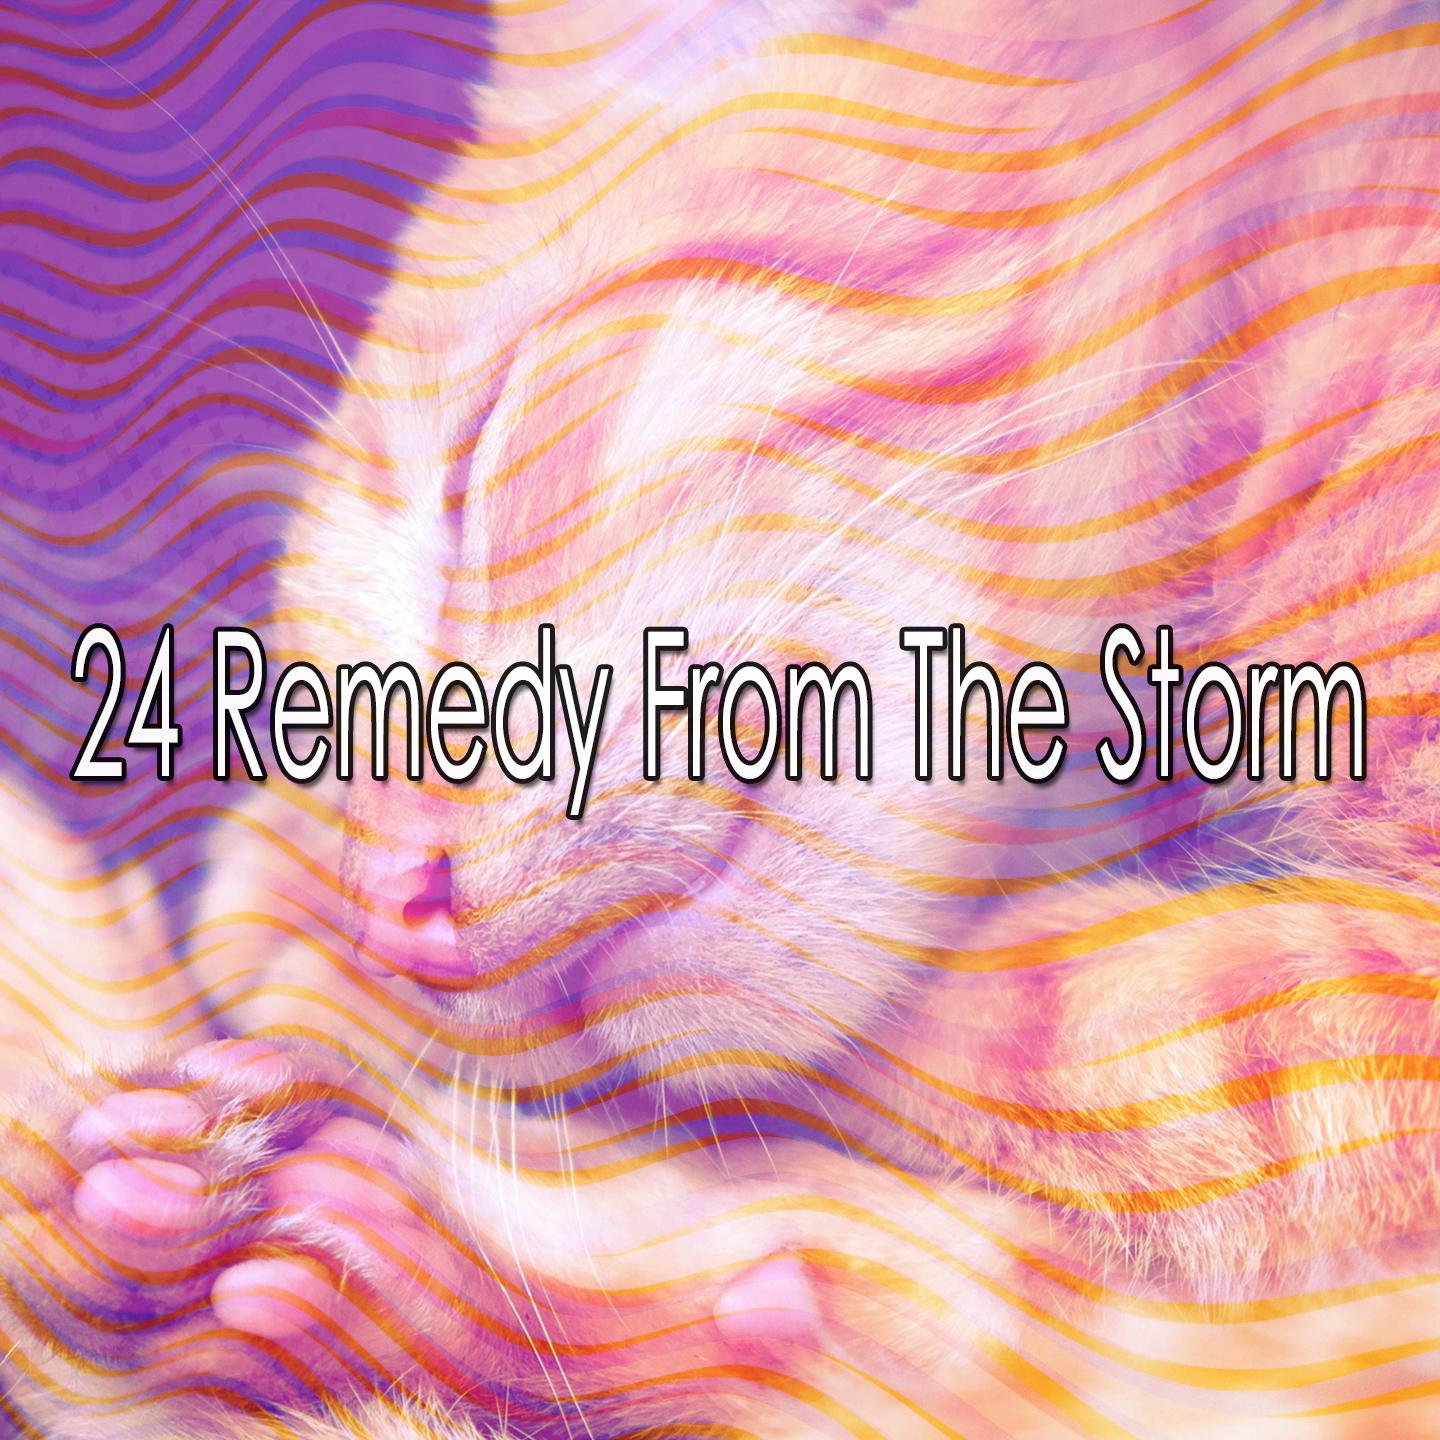 24 Remedy from the Storm